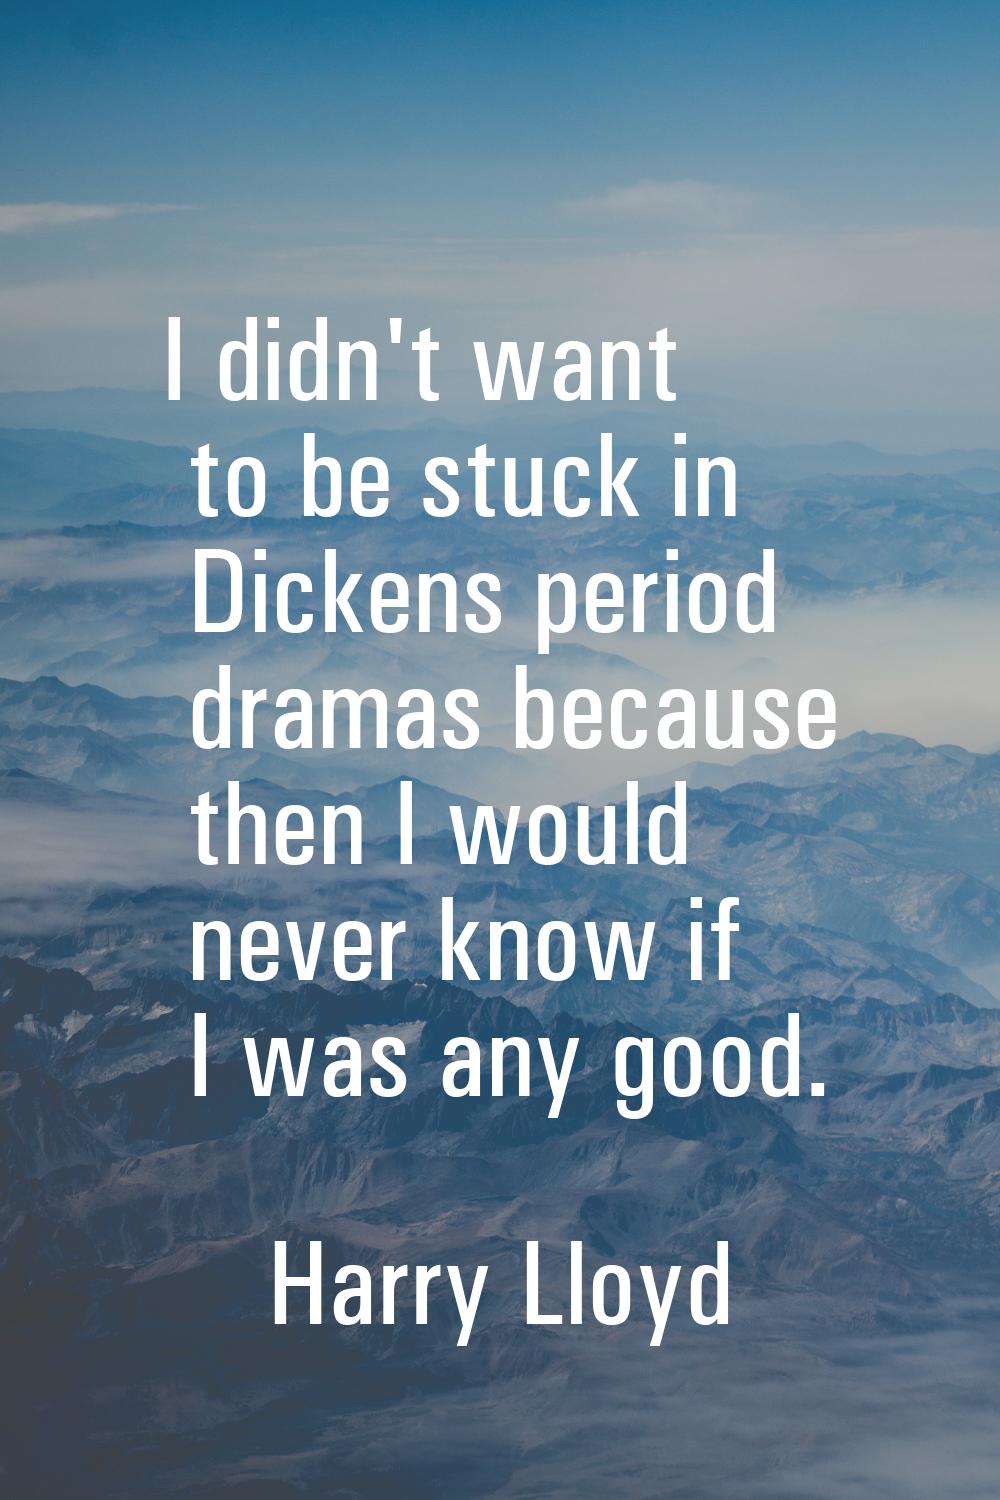 I didn't want to be stuck in Dickens period dramas because then I would never know if I was any goo